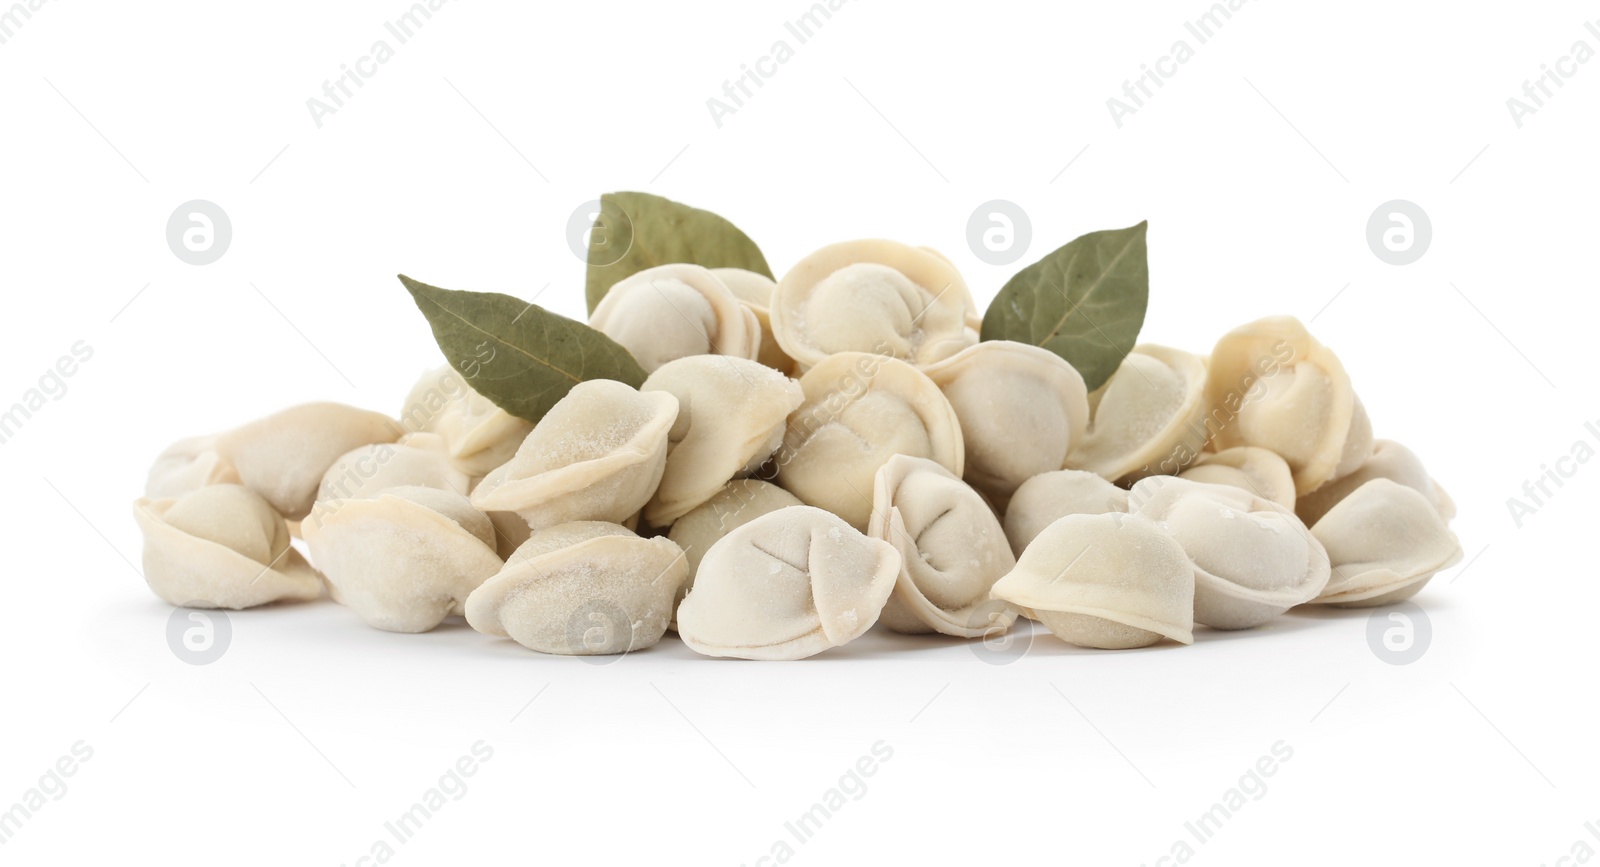 Photo of Raw meat dumplings with bay leaves on white background